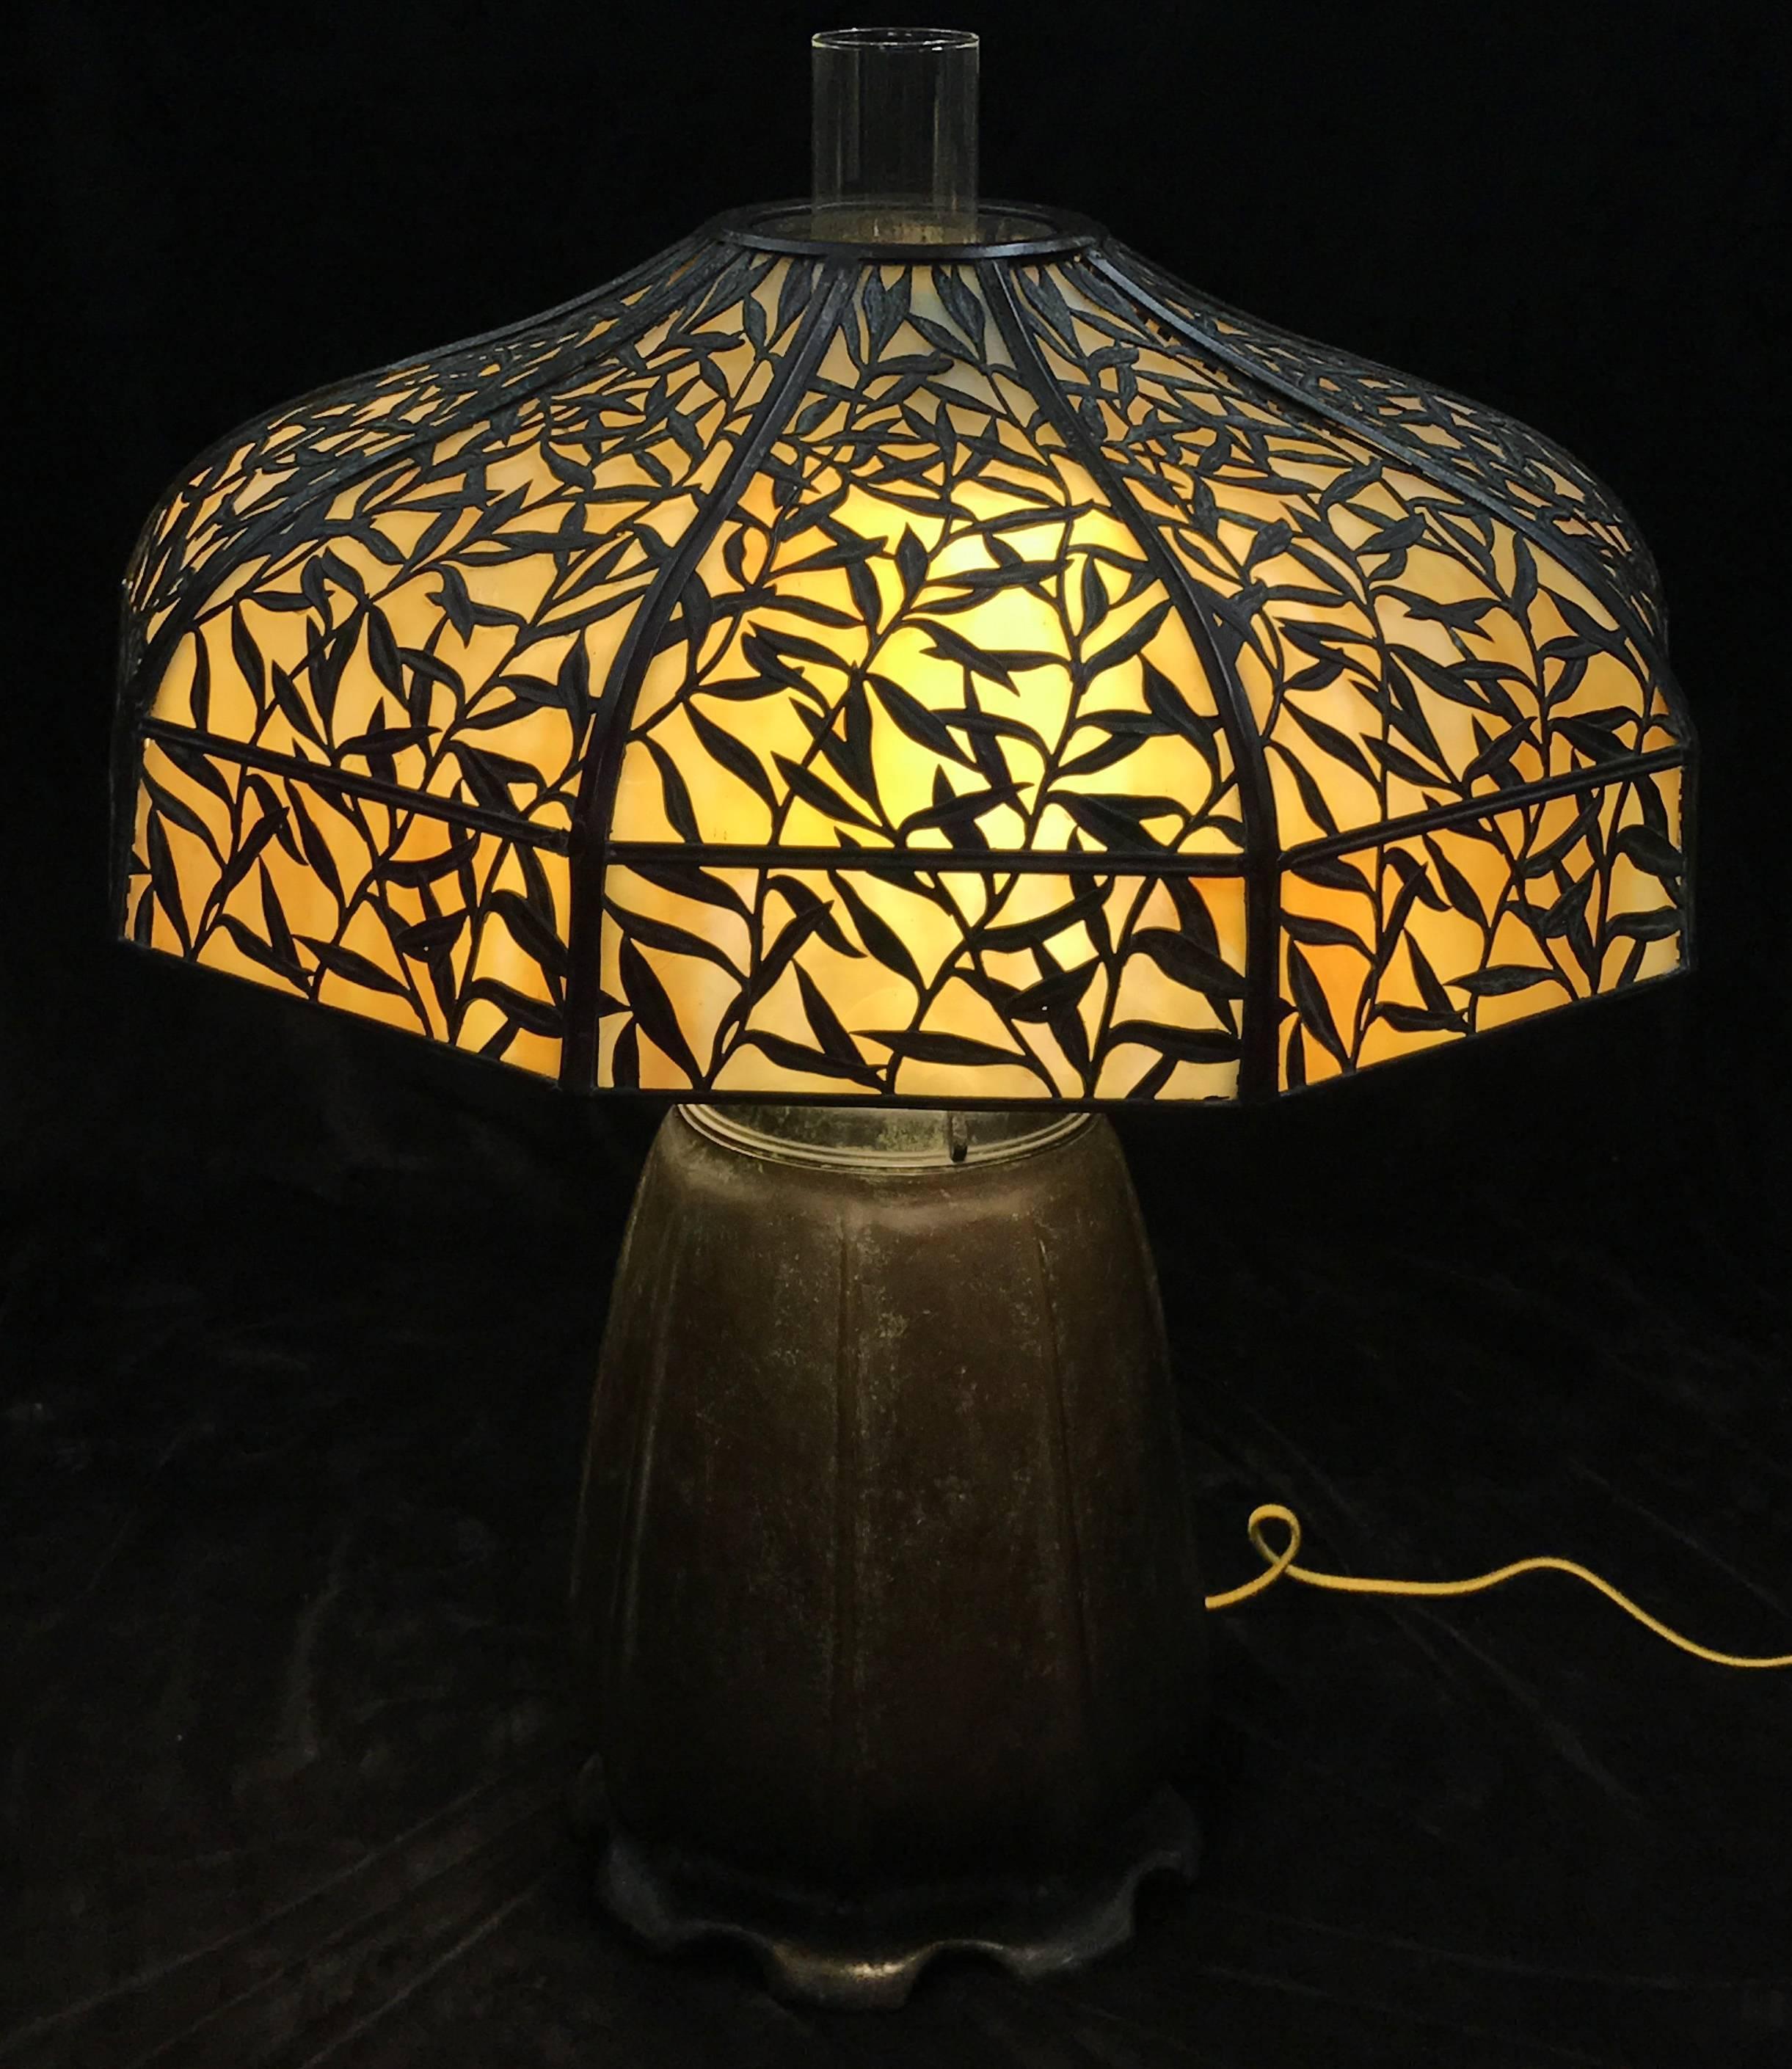 An exquisite Art Nouveau / Arts & Crafts 18 panel slag glass table lamp with metal bamboo overlay on the shade, supported by a large patinated bronze base signed Handel on the font and bottom. The lamp has retained its original oil components